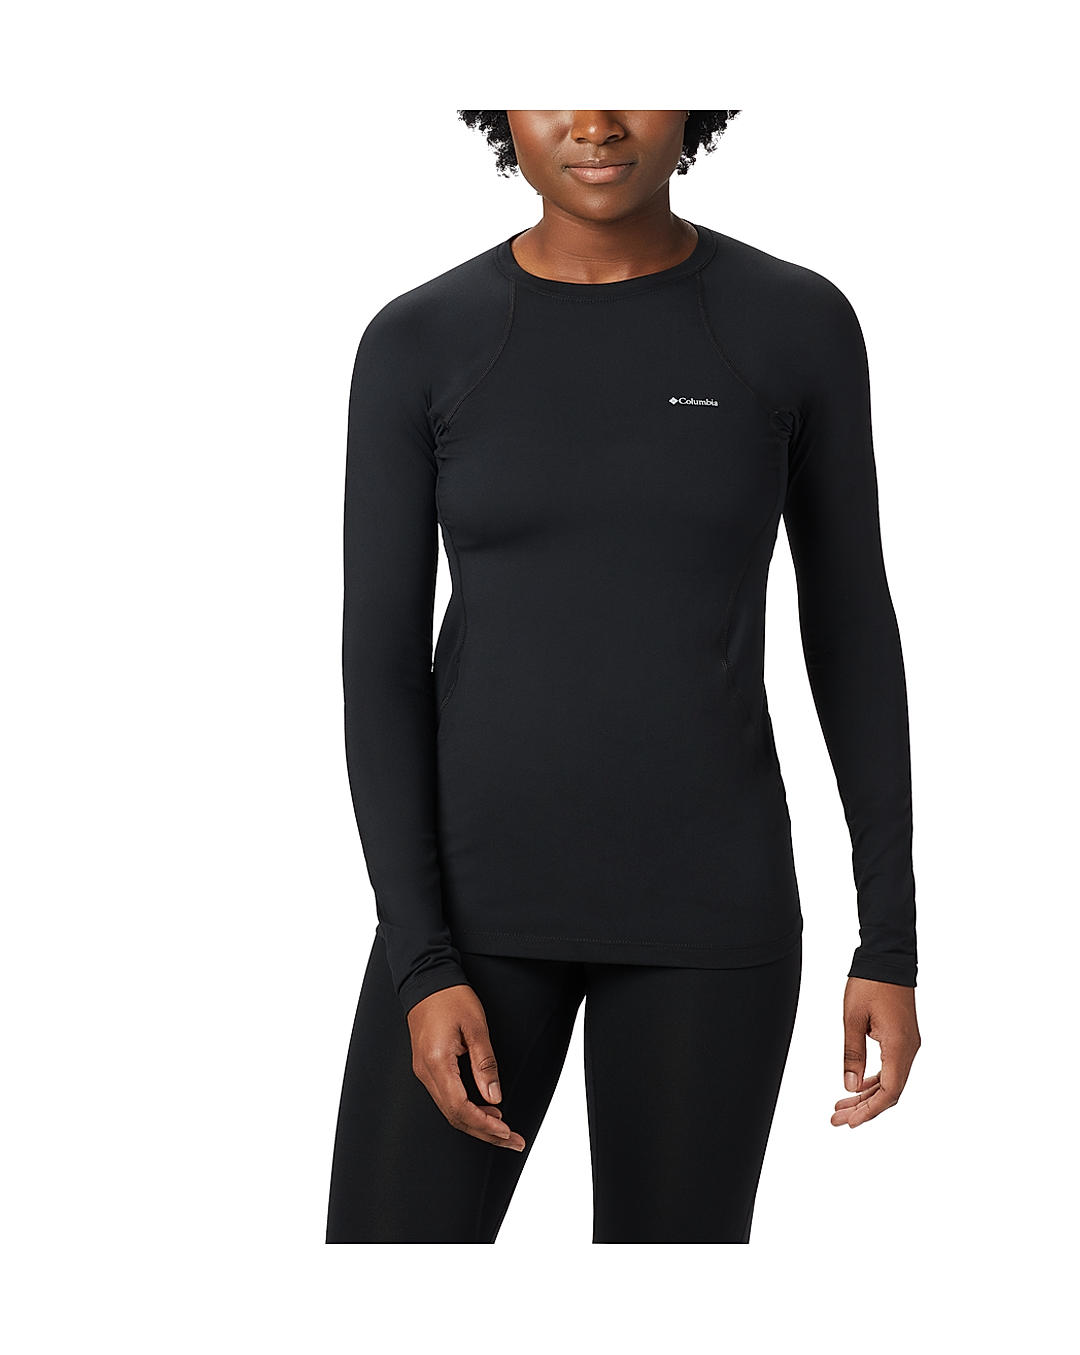 Buy Black Midweight Stretch Tight for Women Online at Columbia Sportswear